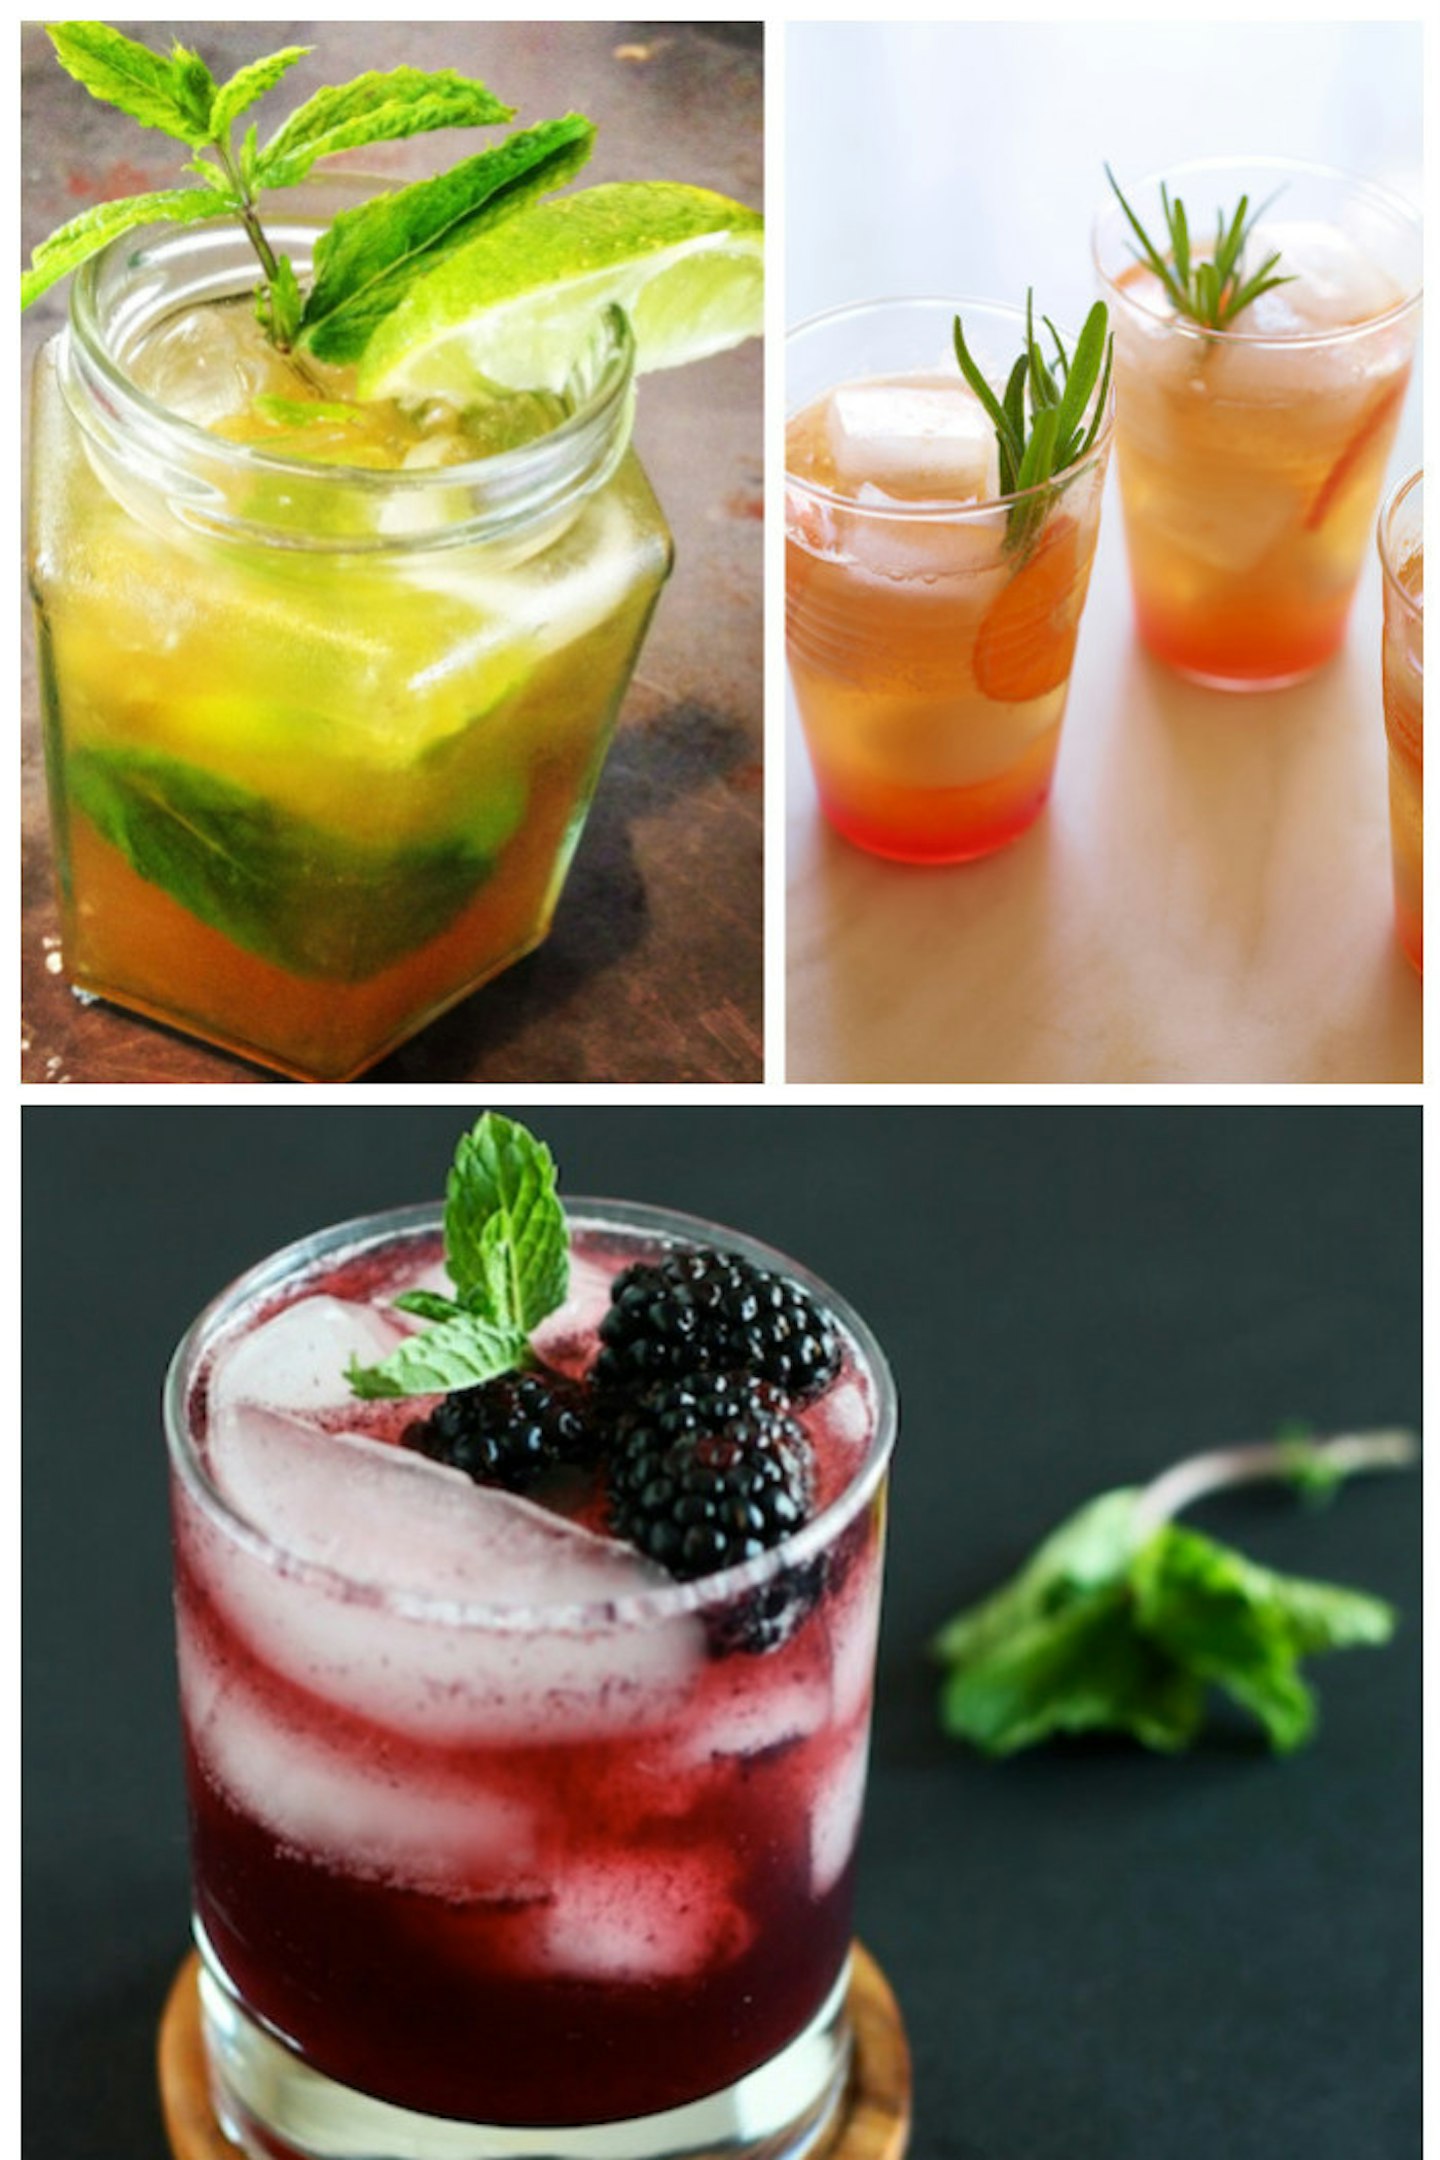 GALLERY: 5 Best Mocktails For January